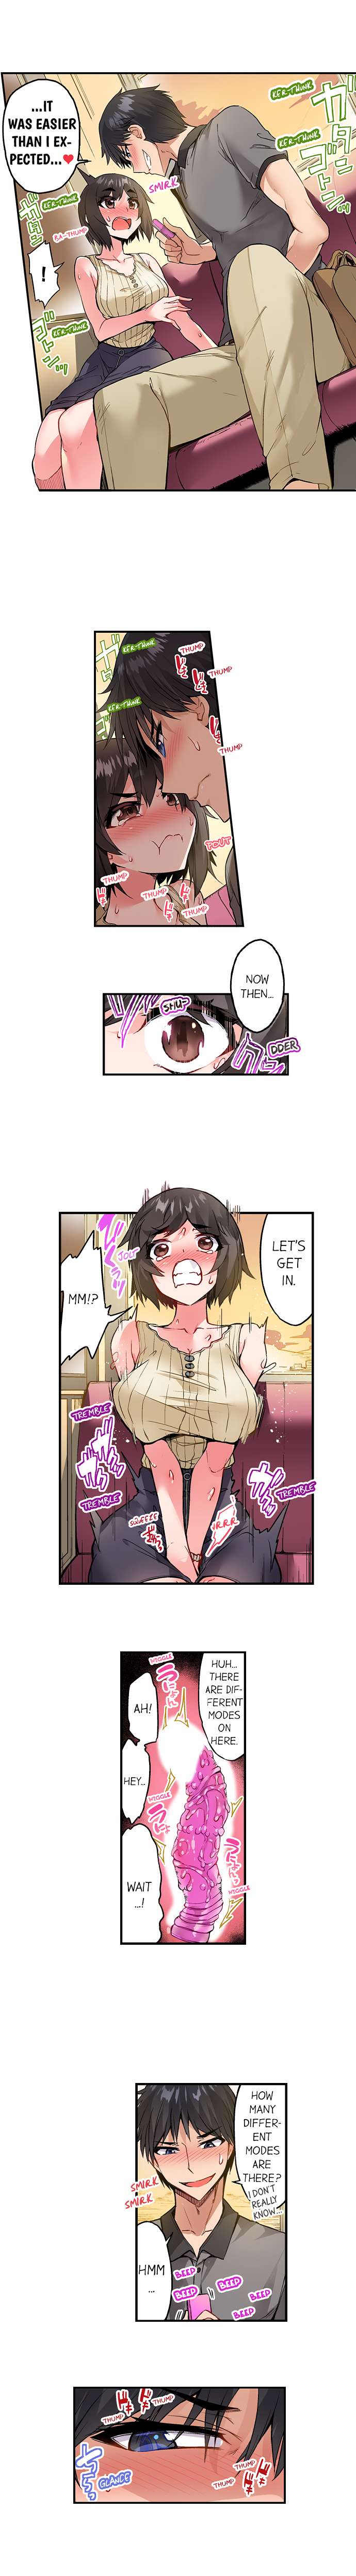 Traditional Job of Washing Girls’ Body - Chapter 144 Page 6